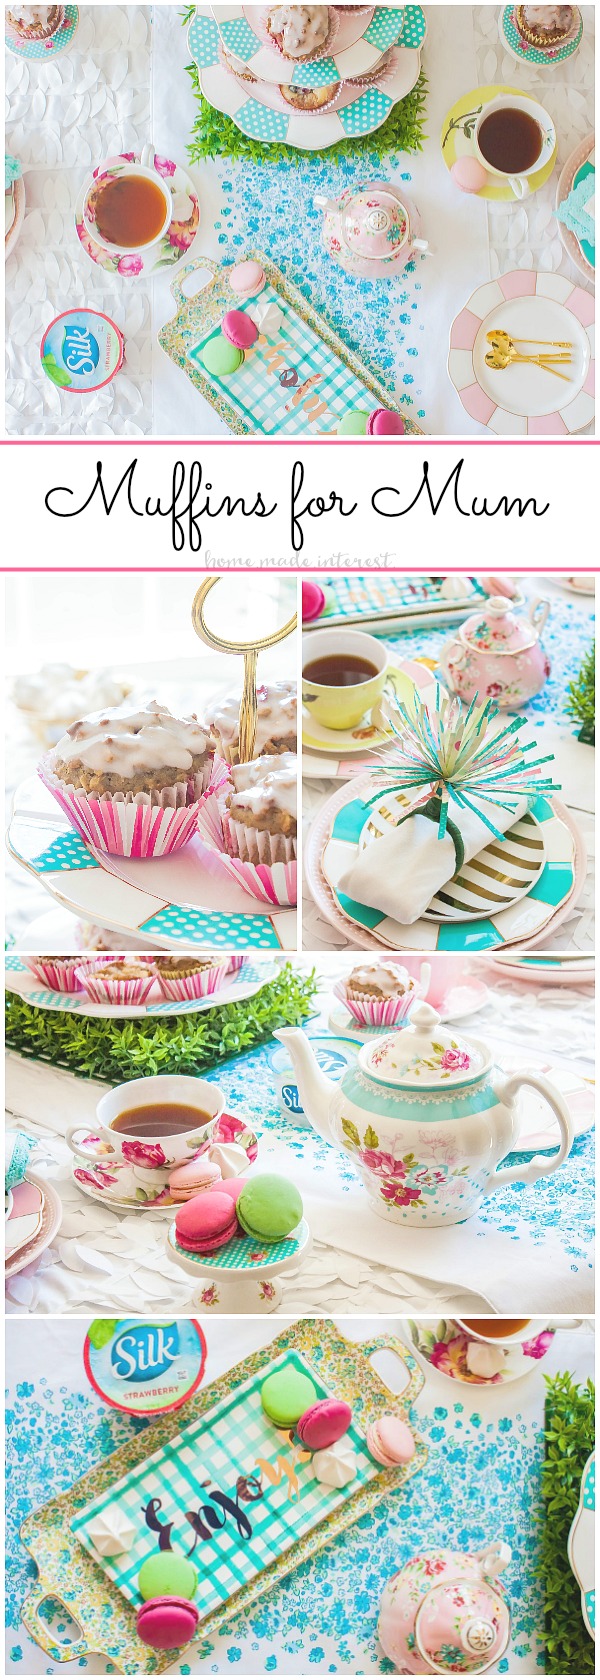 Muffins for Mum Mother’s Day Brunch | Celebrate Mother’s Day with a simple brunch including dairy free muffins for mom! These easy dairy free muffins were simple to make and they were delicious! This beautiful spring party idea is a tea party themed Mother’s Day brunch. It is a fun way to thank your mom for everything she does. We’ve got an easy paper flor tutorial showing you how to turn paper into beautiful napkin rings!